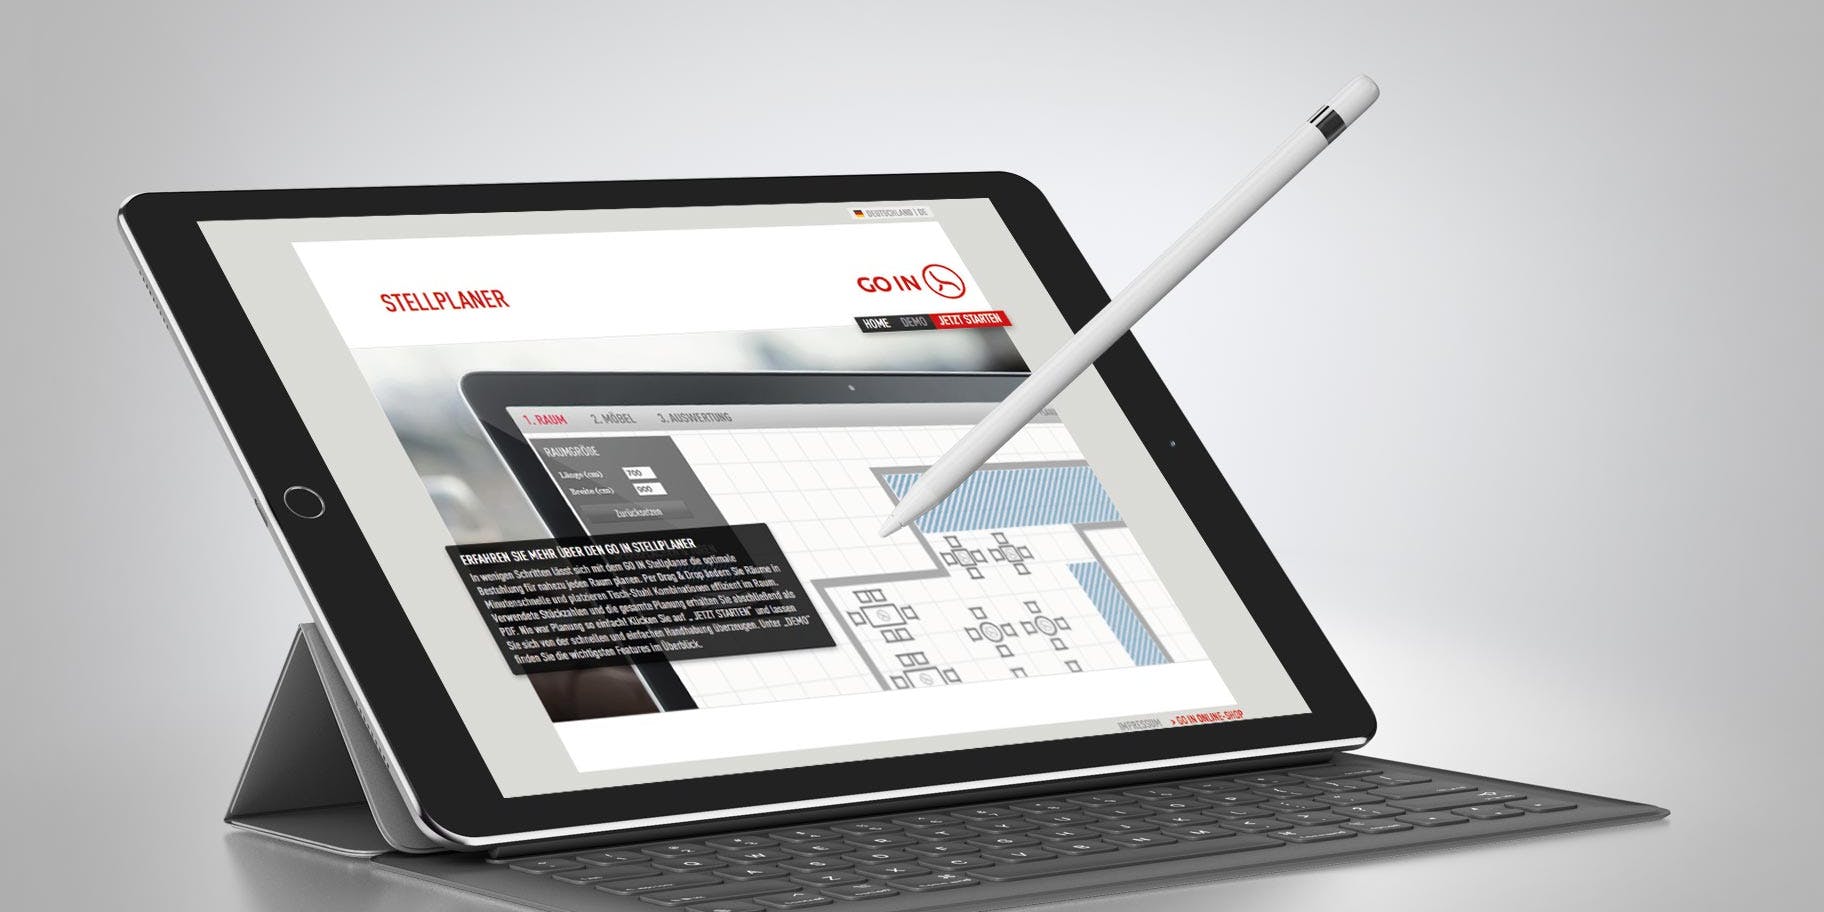 A tablet shows the web tool "Stellplaner" from Go, it is a product configurator.